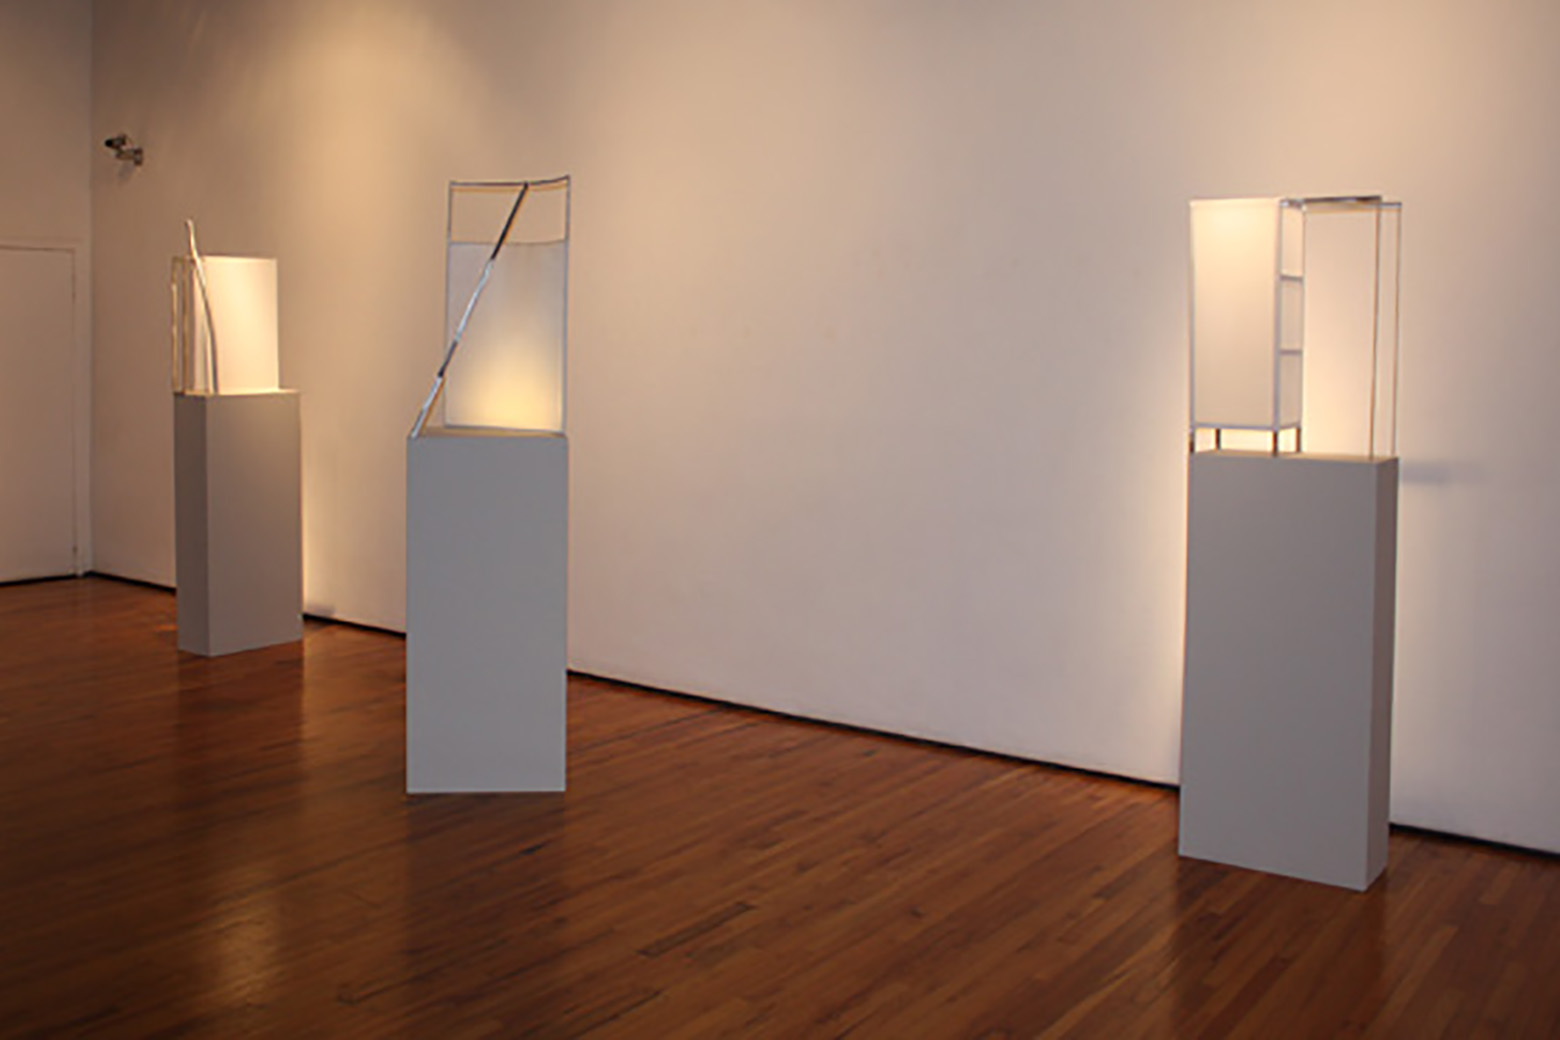 Strongarmed, Inseperable and CompartementalizedInstallation View